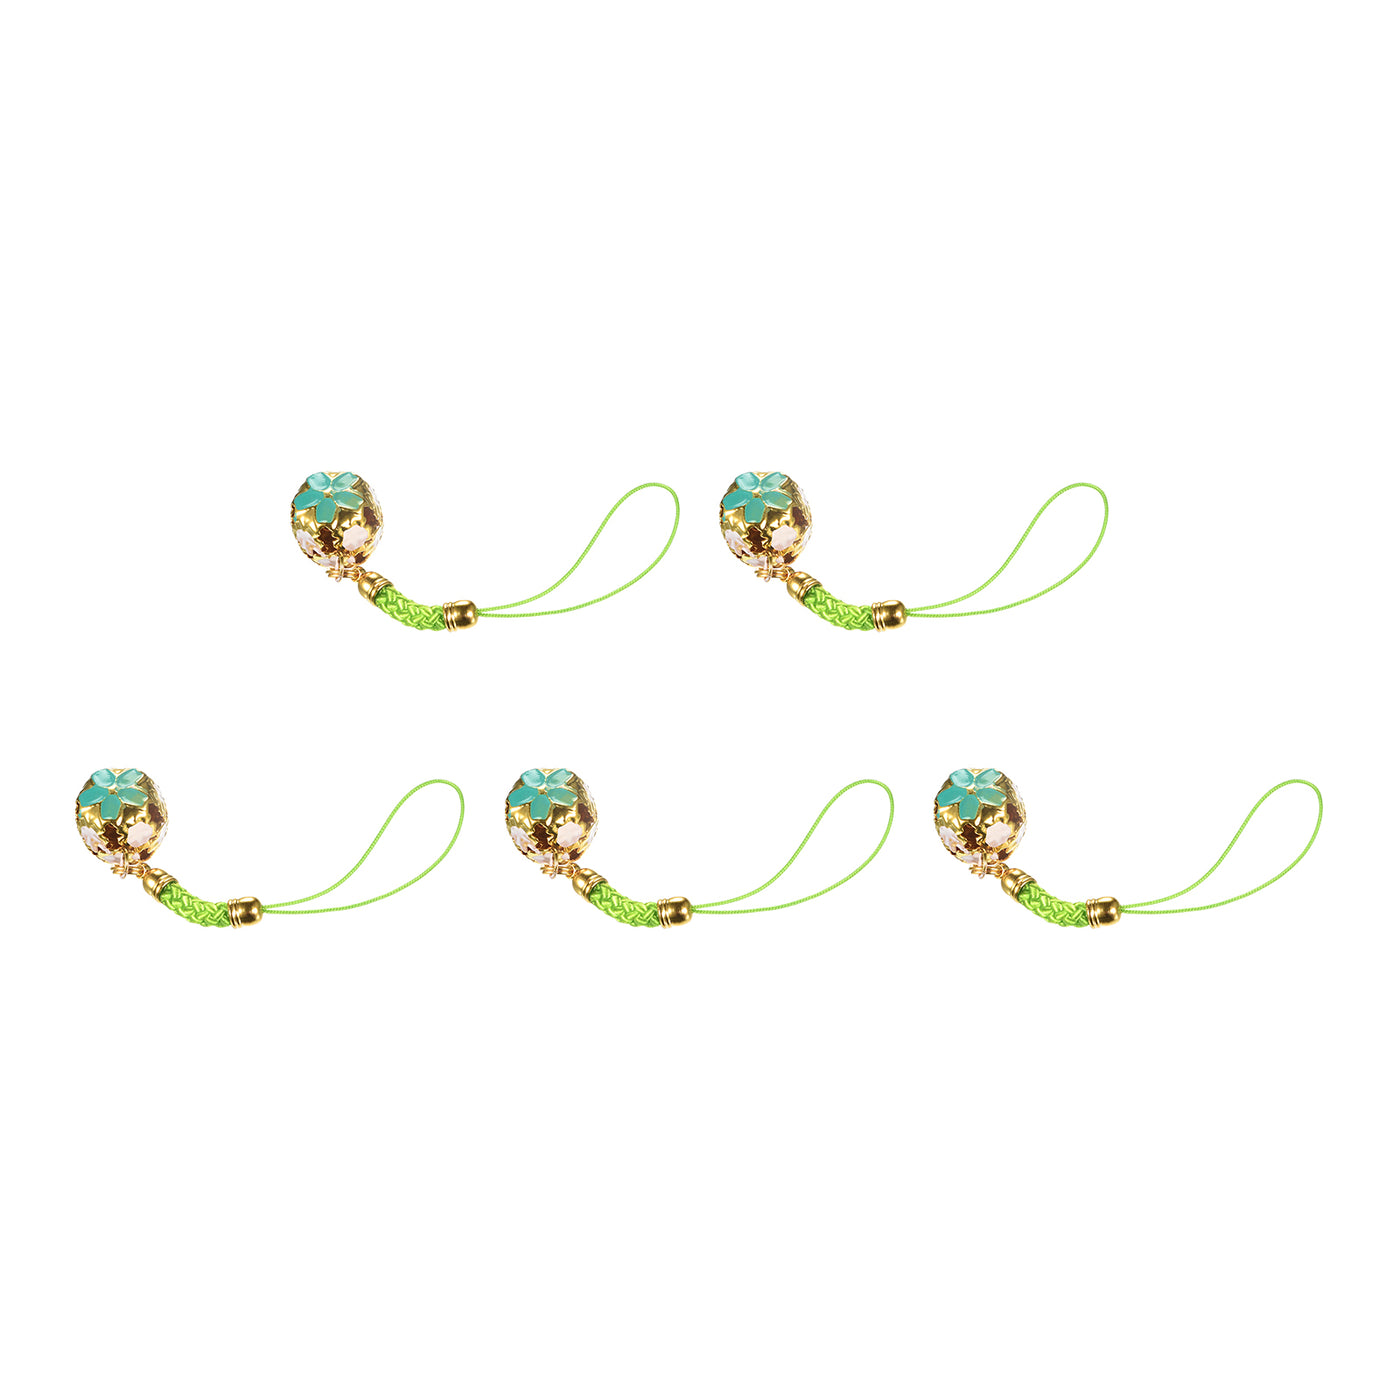 uxcell Uxcell 5Pcs Cellphone Strap Pendant, 10.5cm/0.71" Length Green for DIY Crafts